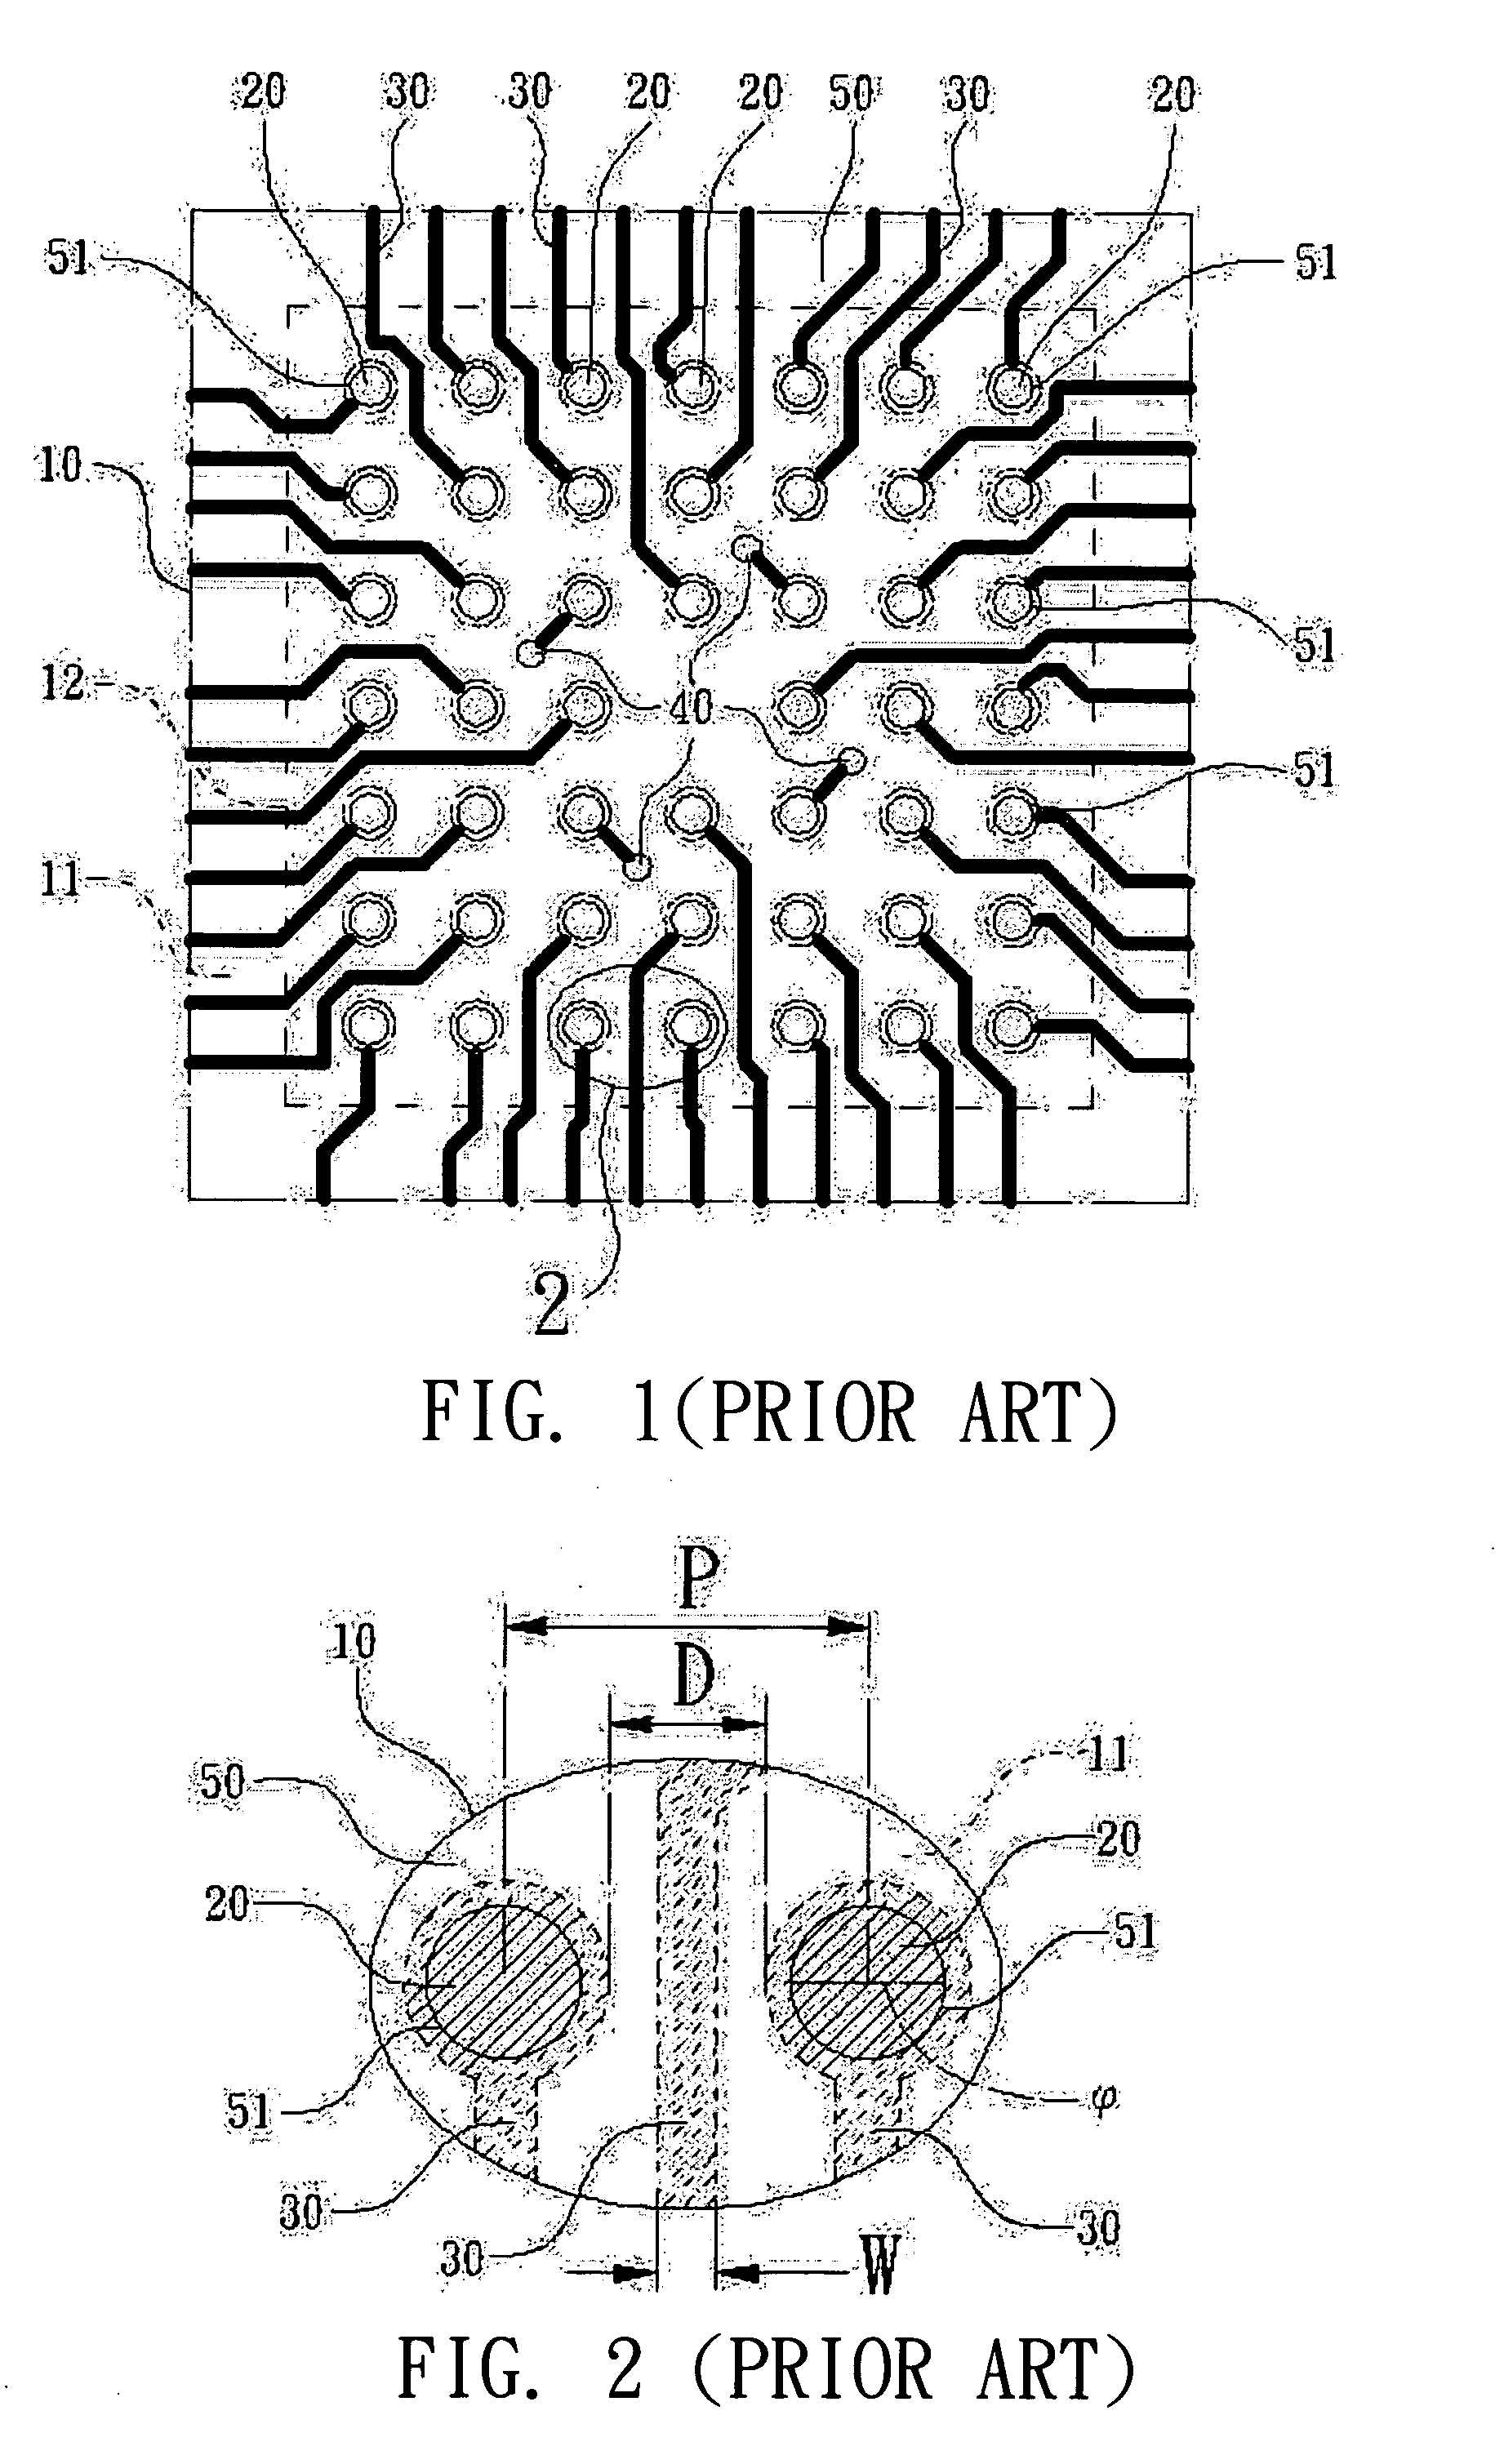 Flip-chip package substrate with a high-density layout